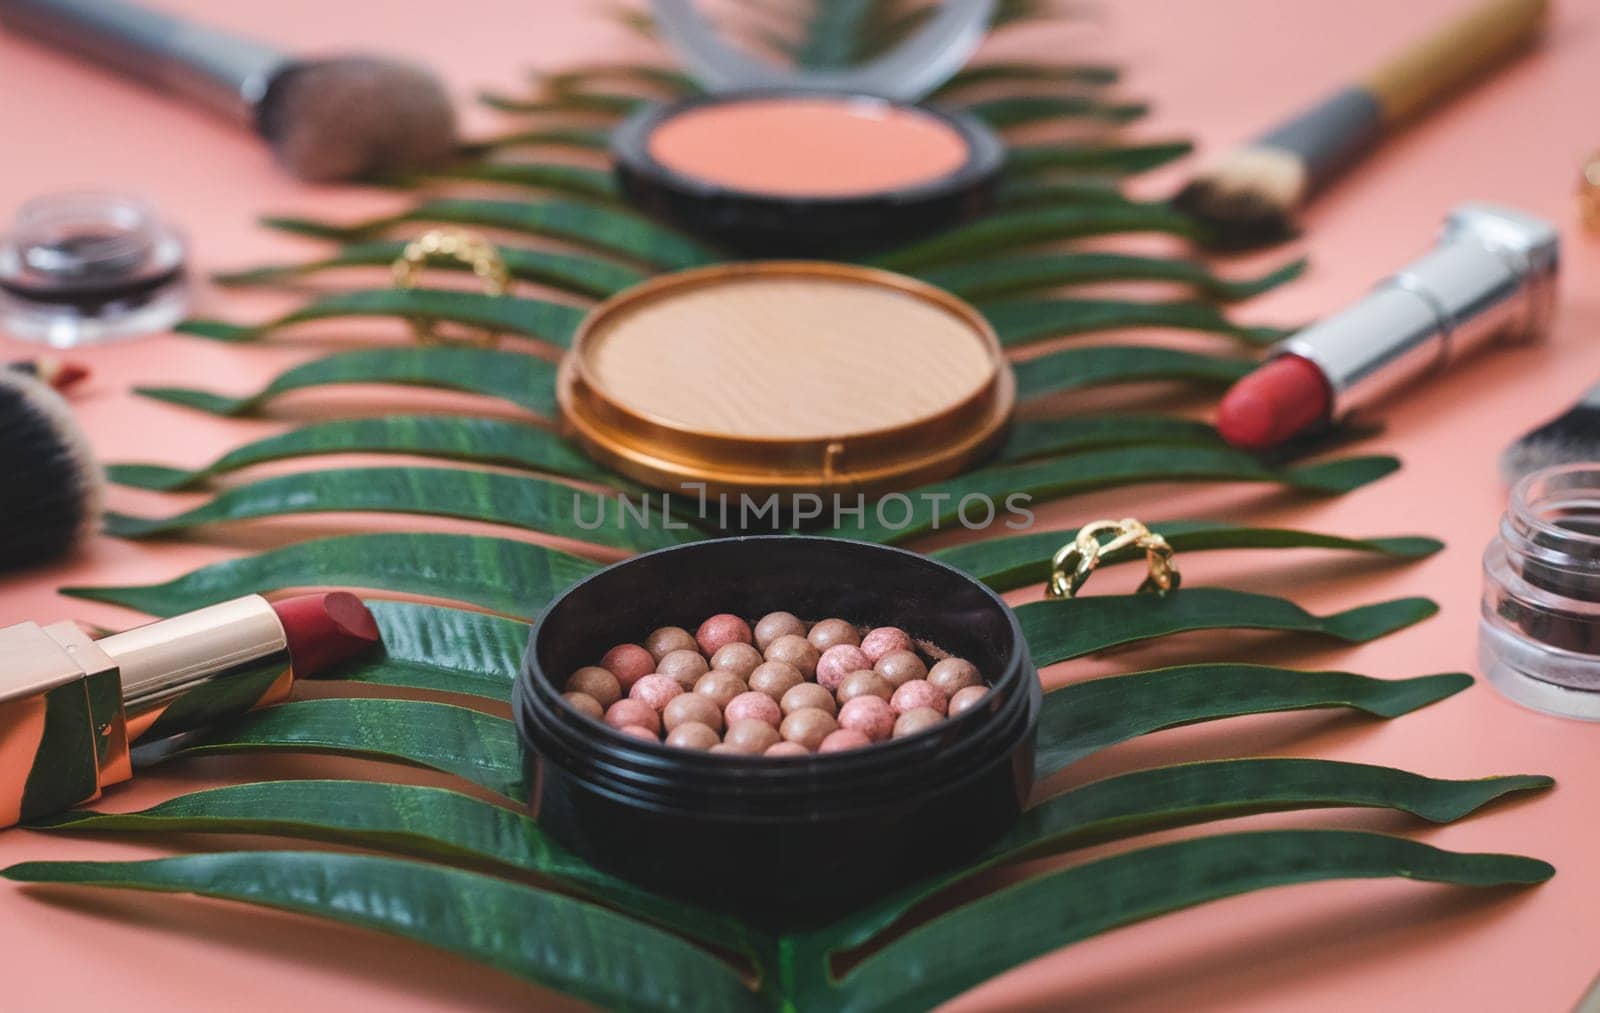 Granular face powder box, gold ring, red lipsticks, makeup brushes and hard texture powder boxes in blur on a palm branch on a pink background, side view close-up of the field. The concept of cosmetics, beauty salon.